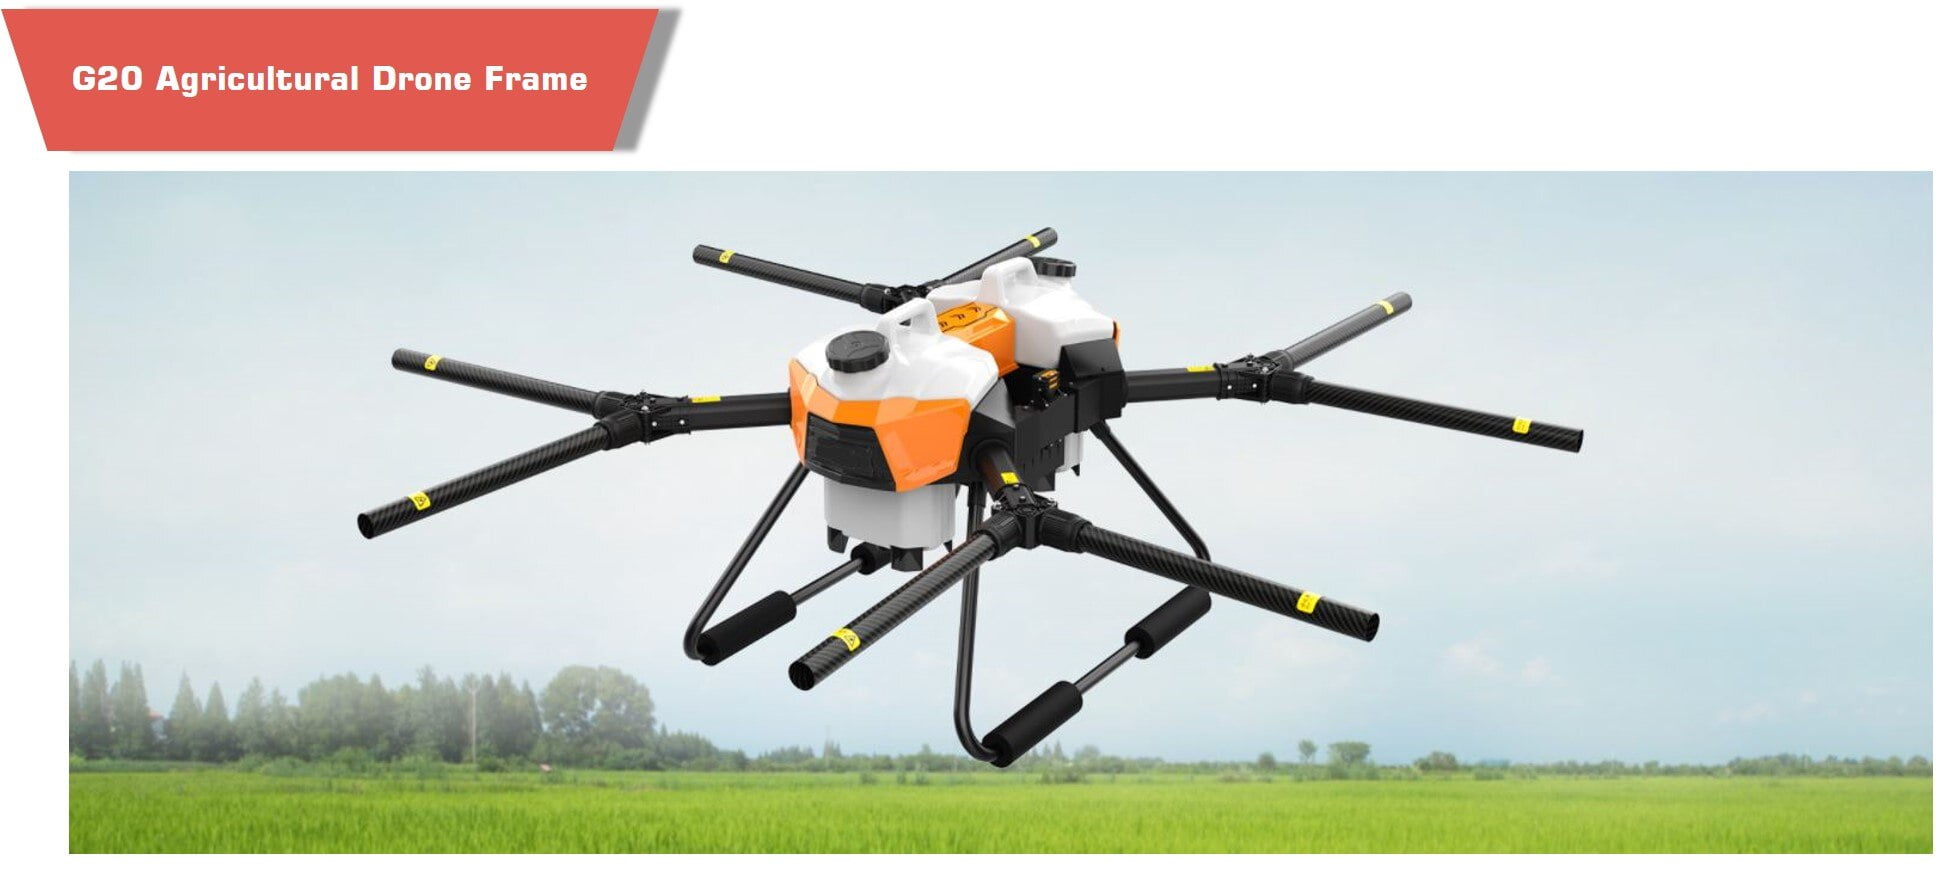 G20 agricultural drone frame p1 motionew